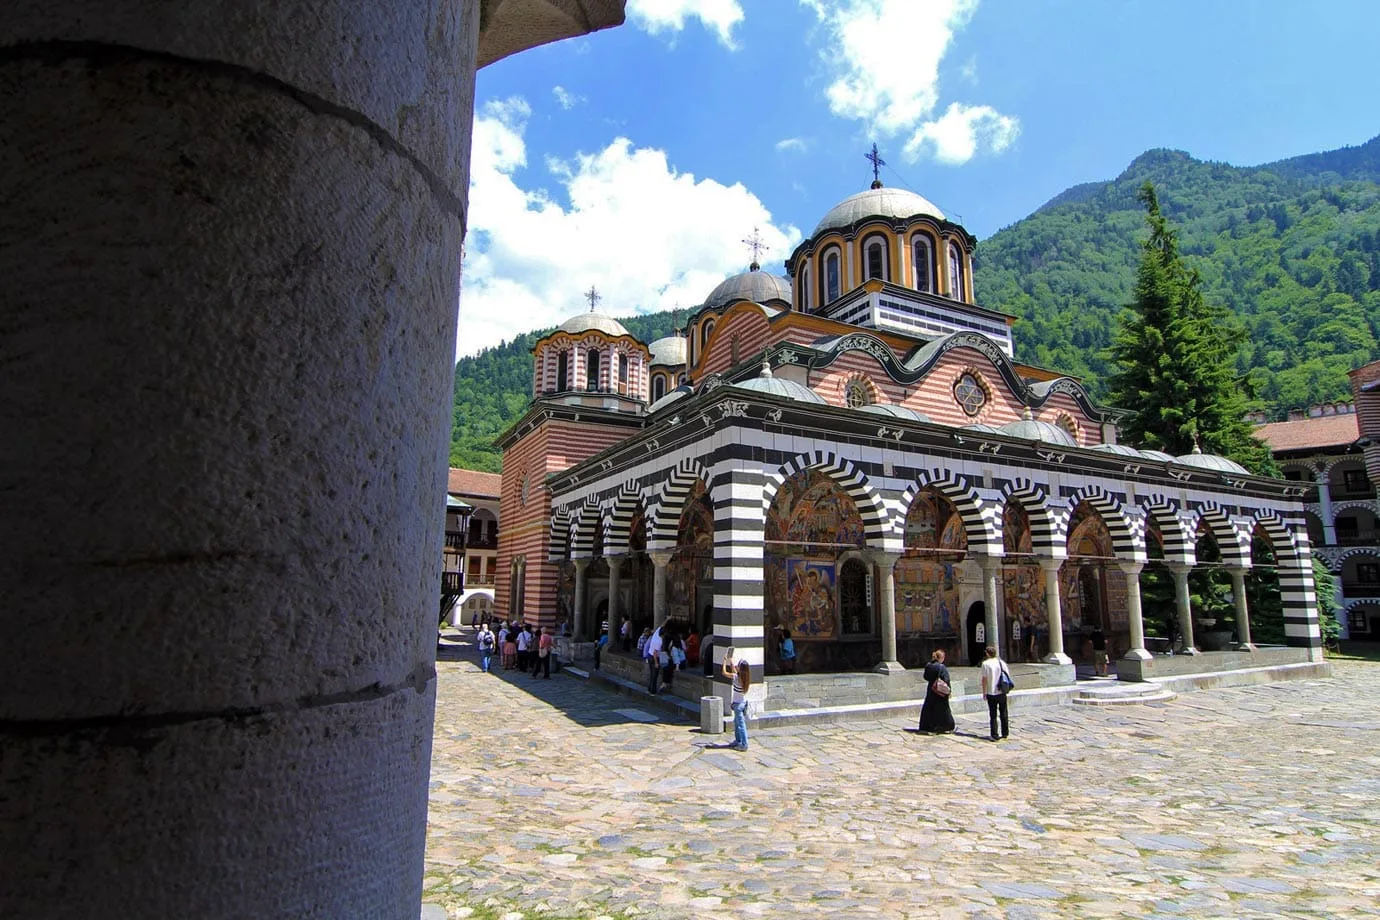 Rila Monastery is largest and most famous Eastern Orthodox monastery in Bulgaria